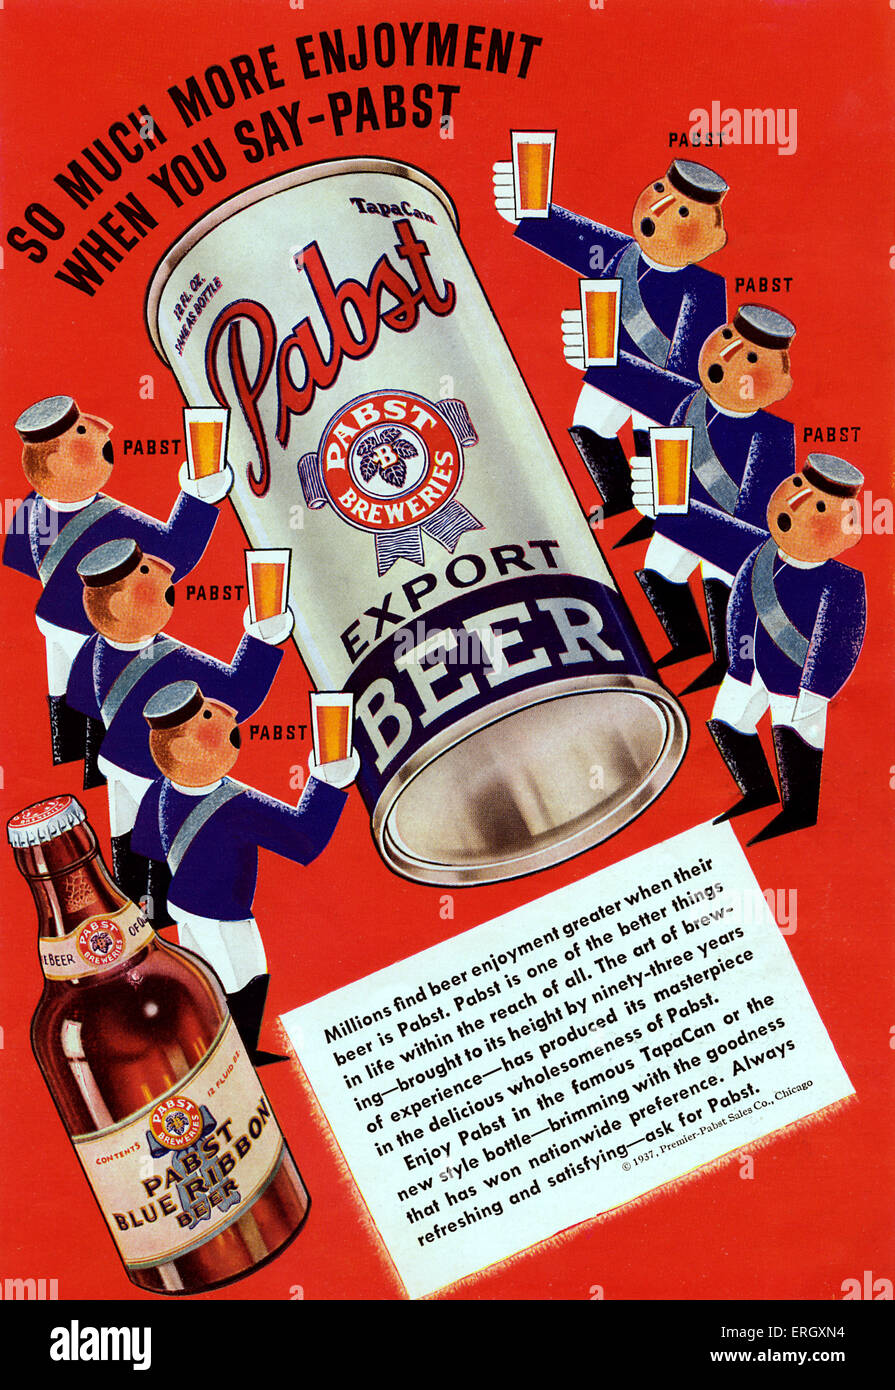 'Pabst blue ribbon beer' advertisement. Caption reads: 'So much more enjoyment when you say- Pabst'. Stock Photo